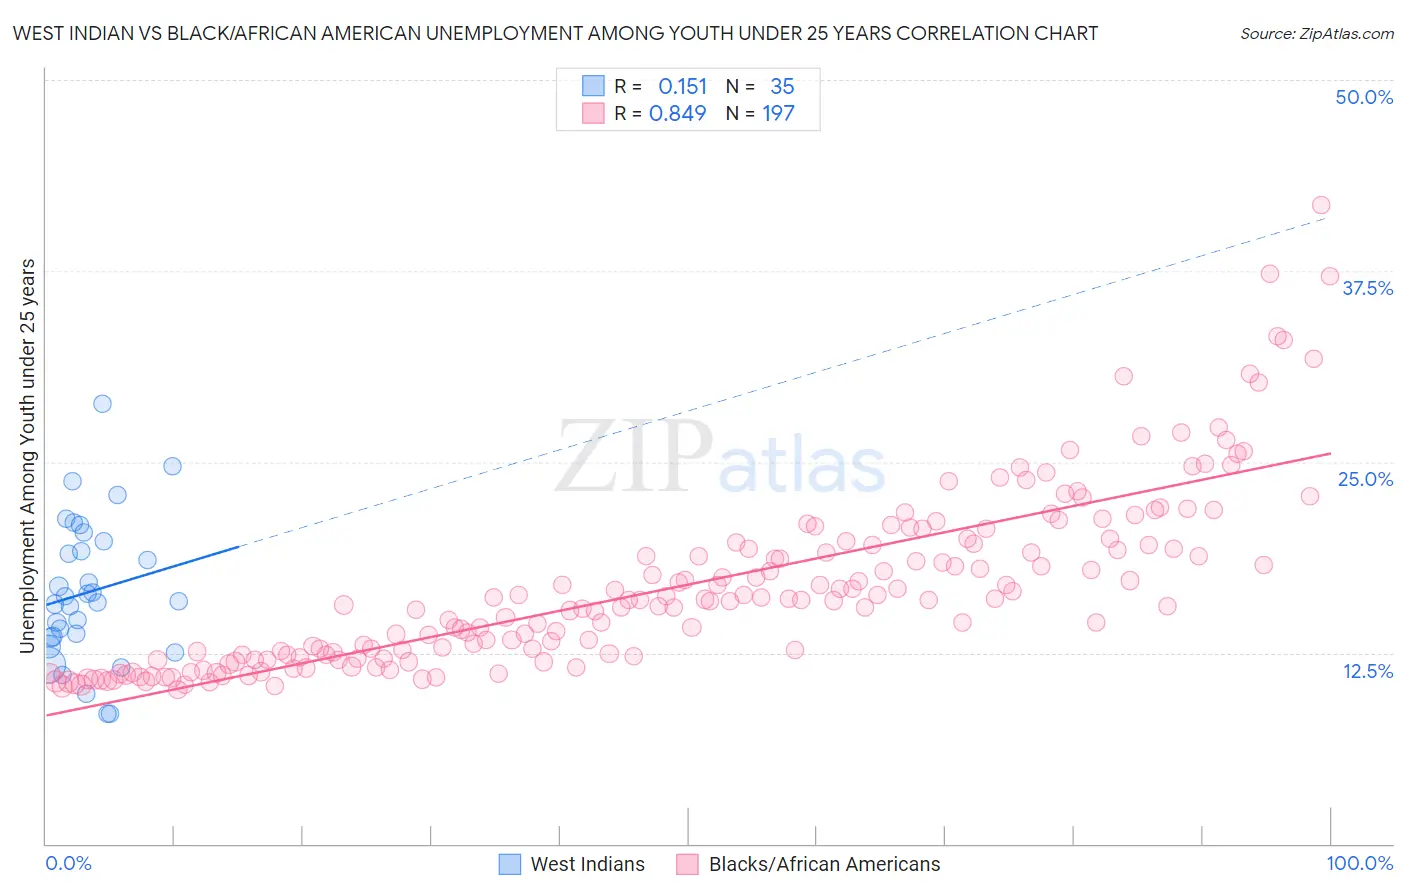 West Indian vs Black/African American Unemployment Among Youth under 25 years